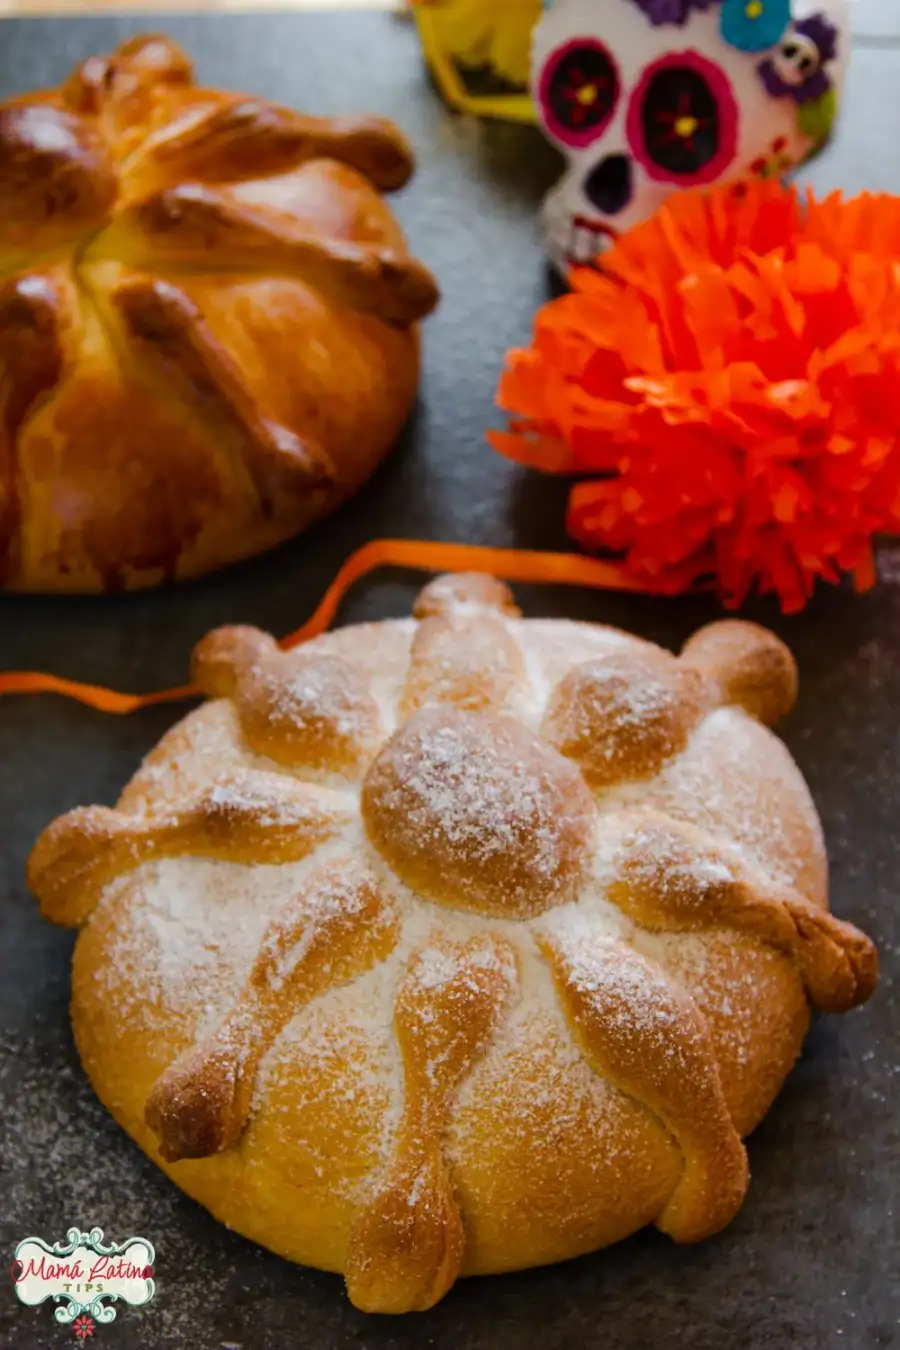 Reference - https://www.mamalatinatips.com/2021/10/mexican-day-of-the-dead-bread.html